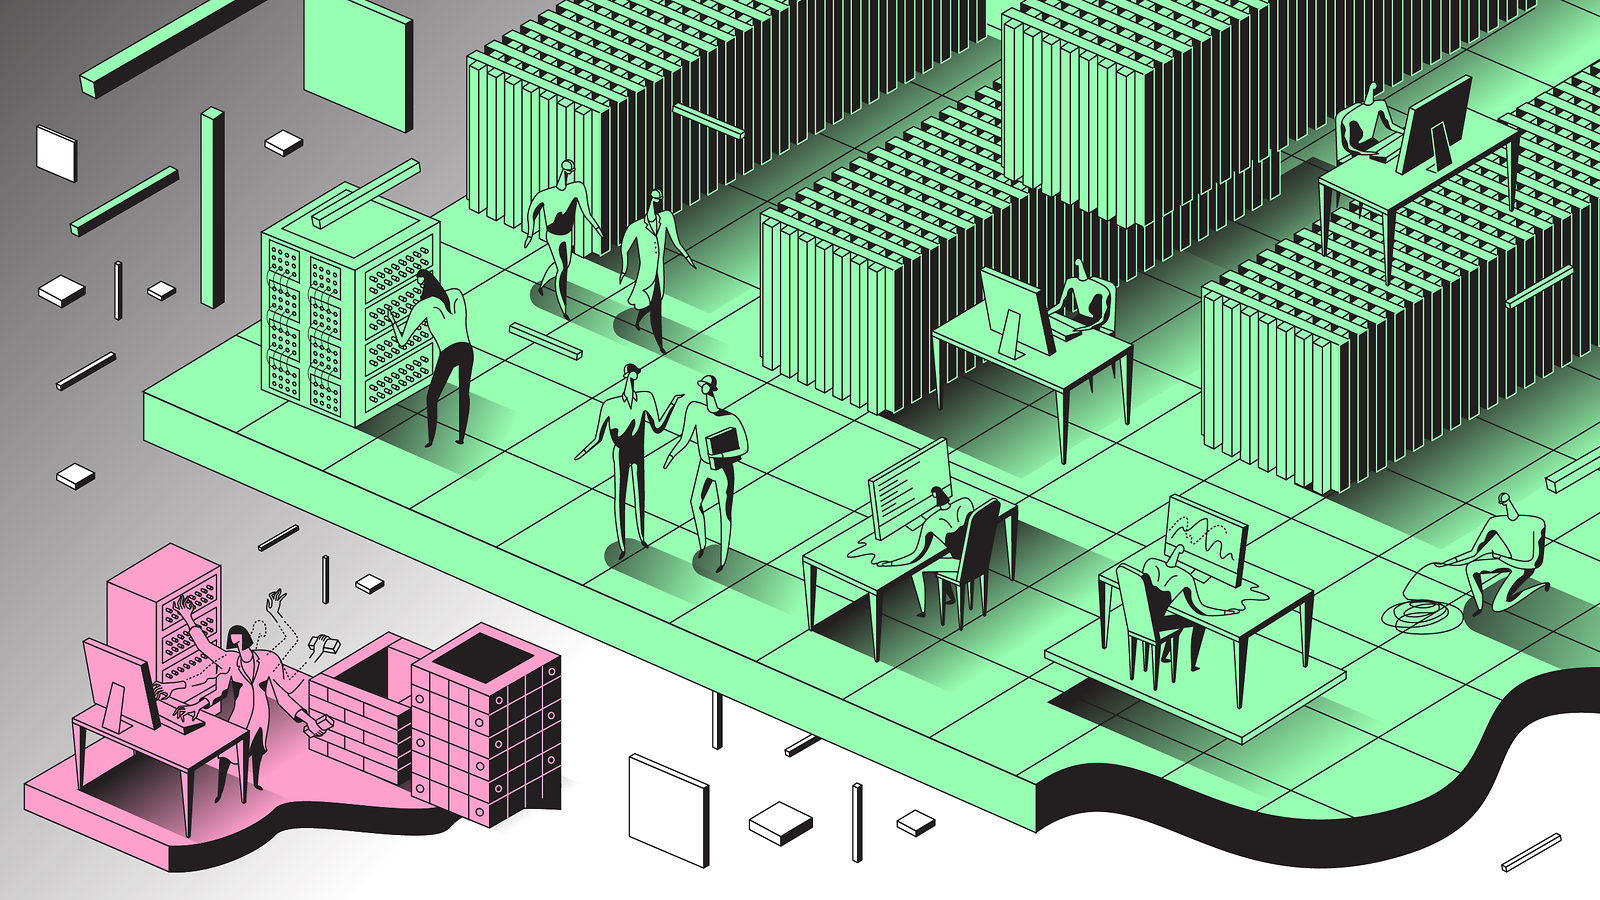 Illustration of people in larger green offices vs one person in smaller pink office